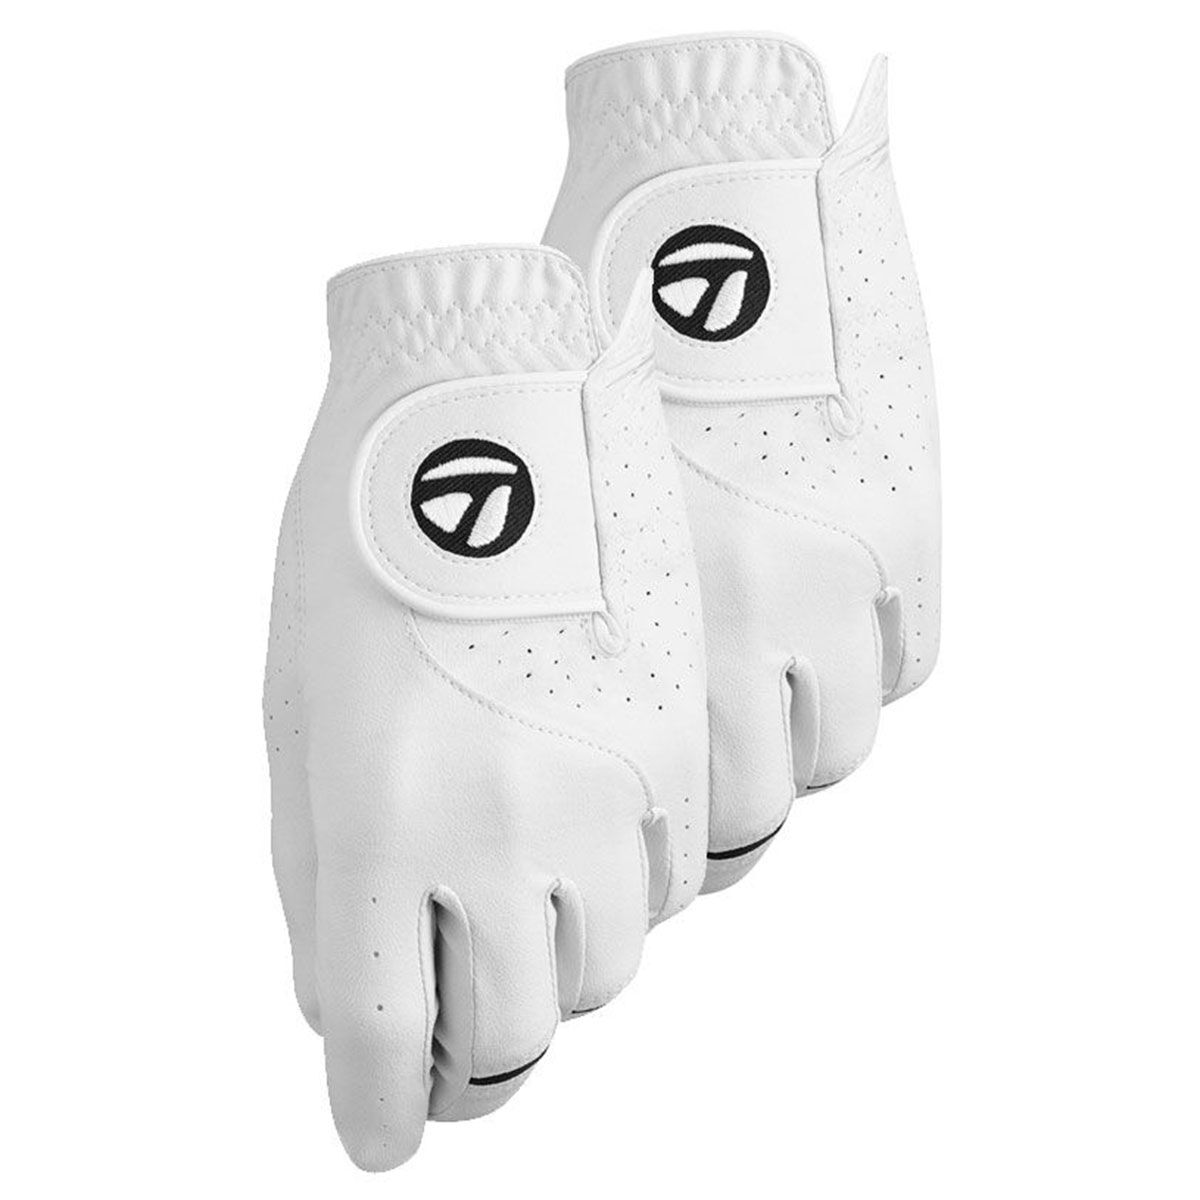 TaylorMade Men’s Stratus Tech Golf Glove - 2 Pack, Mens, Left hand, Large, White | American Golf